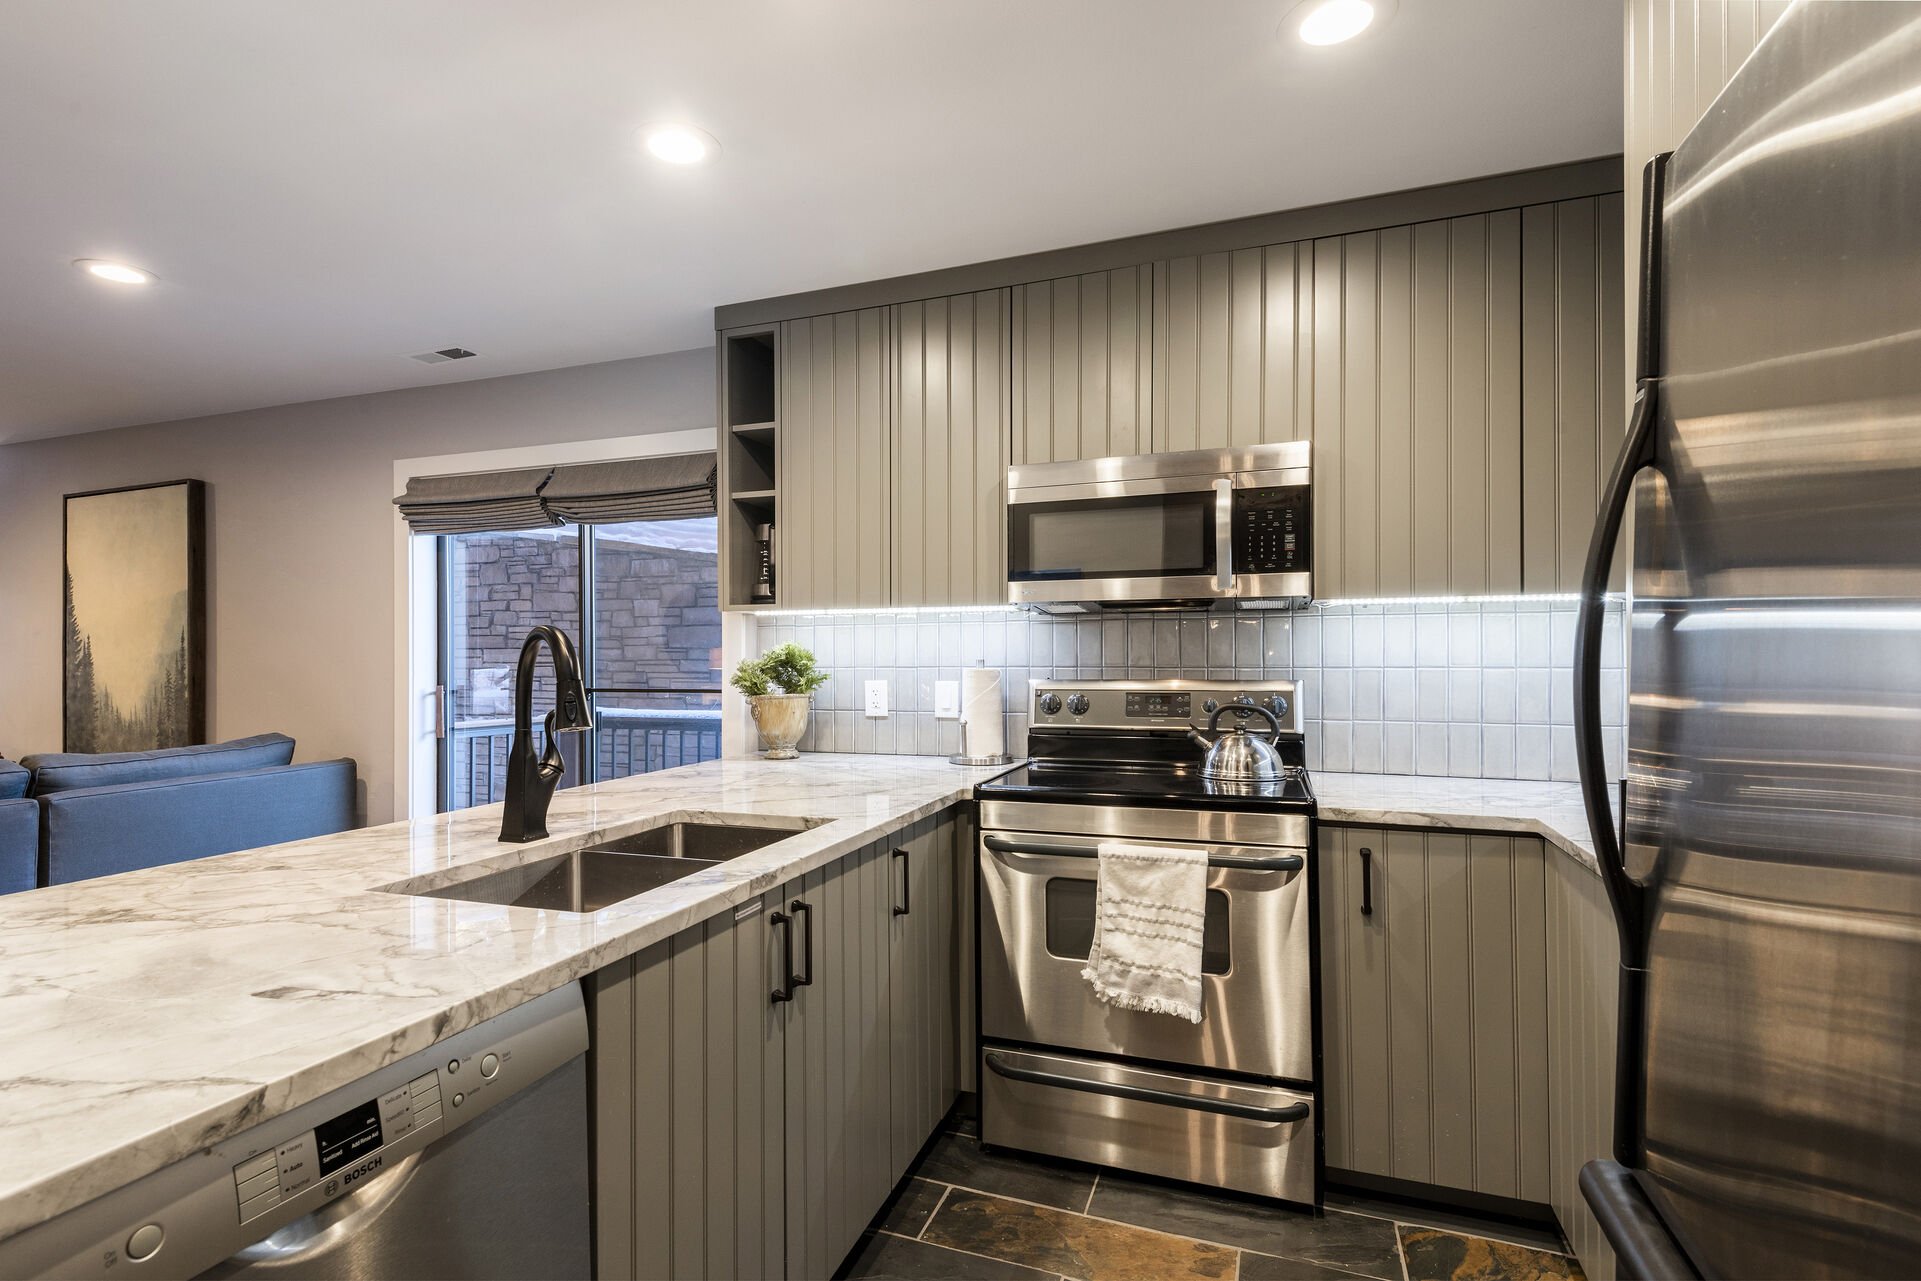 Remodeled Kitchen with Stainless Steel Appliances, and Ample Quartz Countertops for Meal Prep and Entertaining